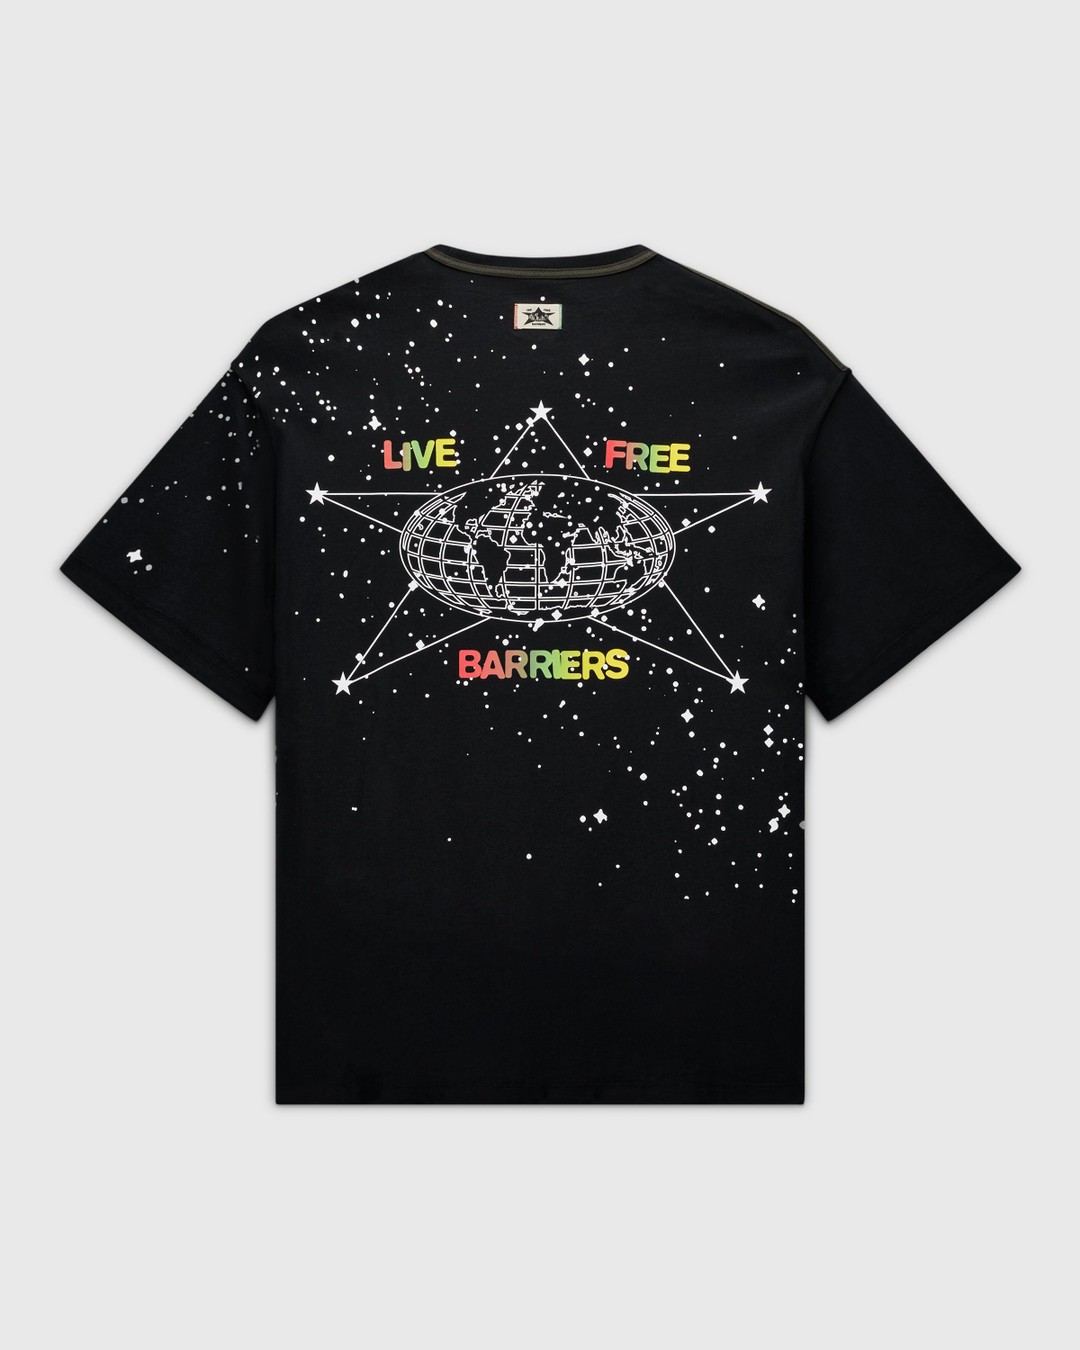 Converse x Barriers – Court Ready Crossover Tee Black - T-shirts - Black - Image 1